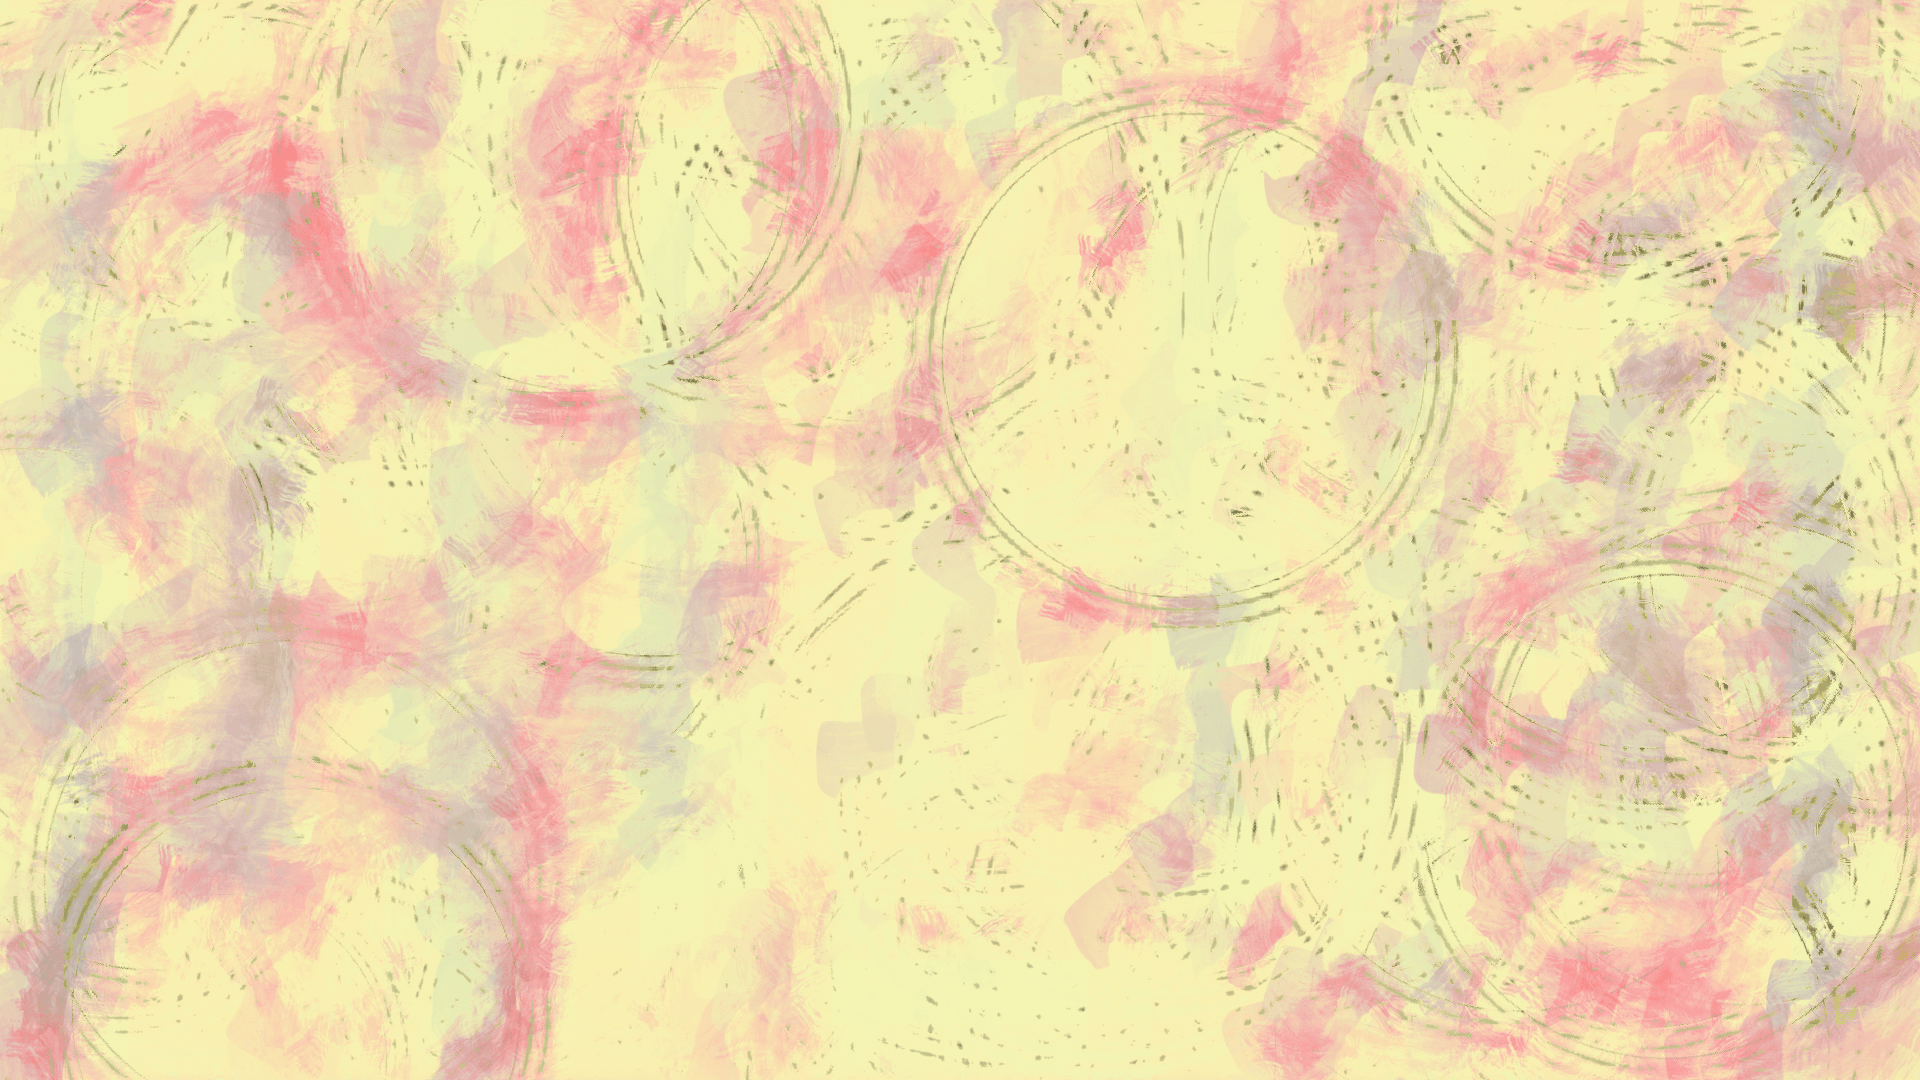 Circles on a Pink and Yellow Color Sketch Background HD